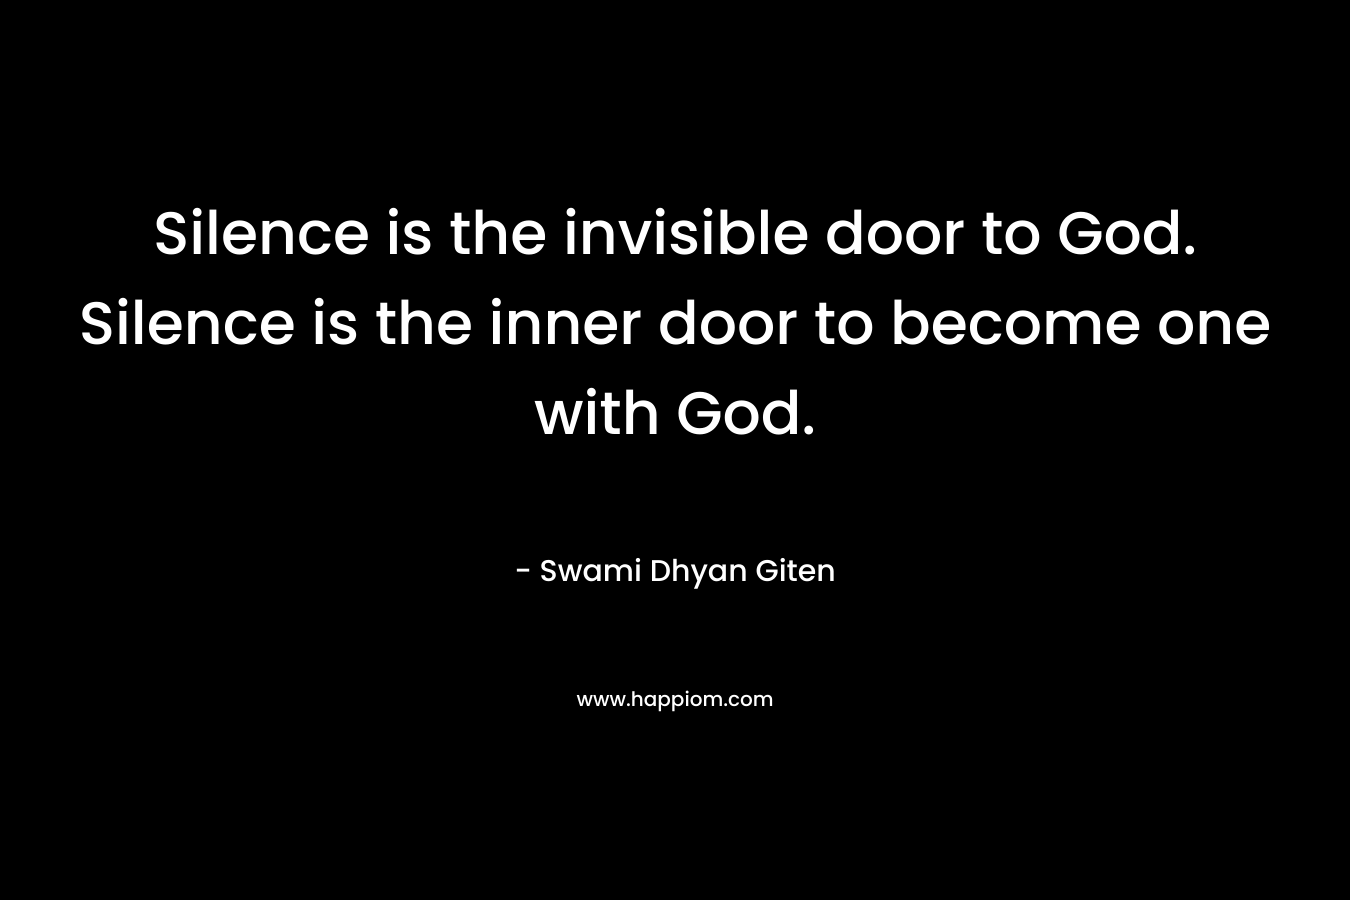 Silence is the invisible door to God. Silence is the inner door to become one with God.